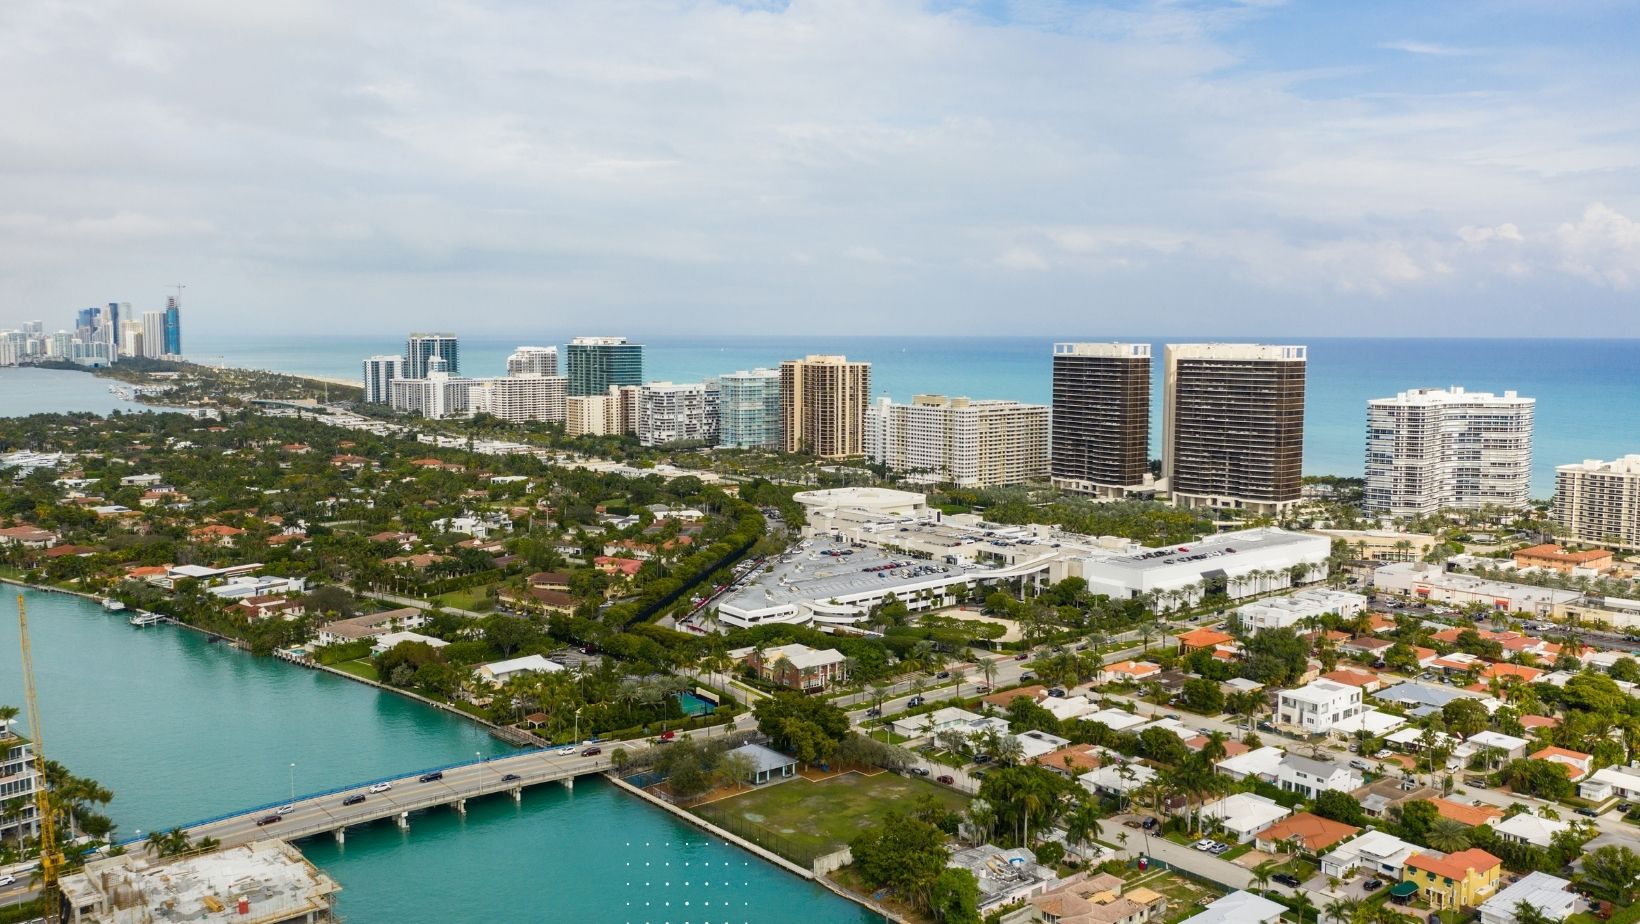 Bal Harbour Real Estate - Homes for Sale in Bal Harbour Florida